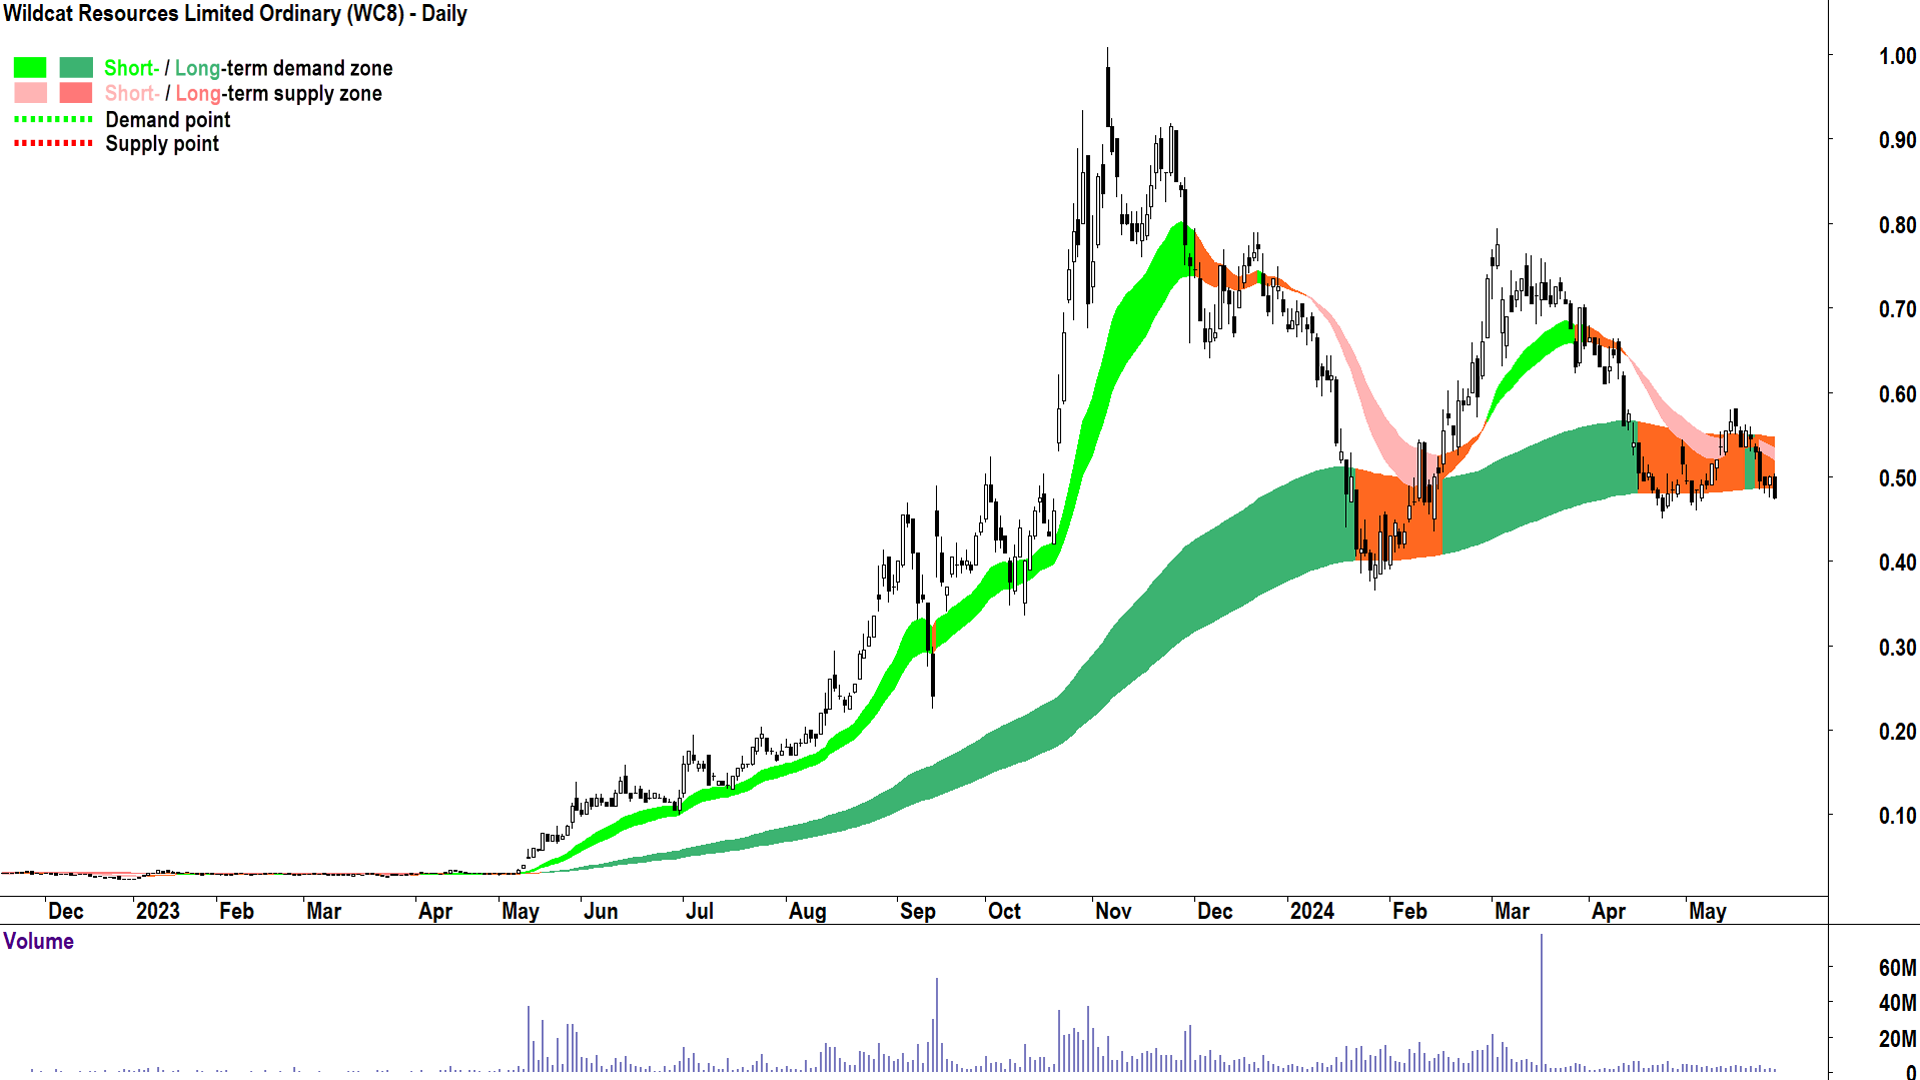 Wildcat Resources (ASX-WC8) chart 27 May 2024